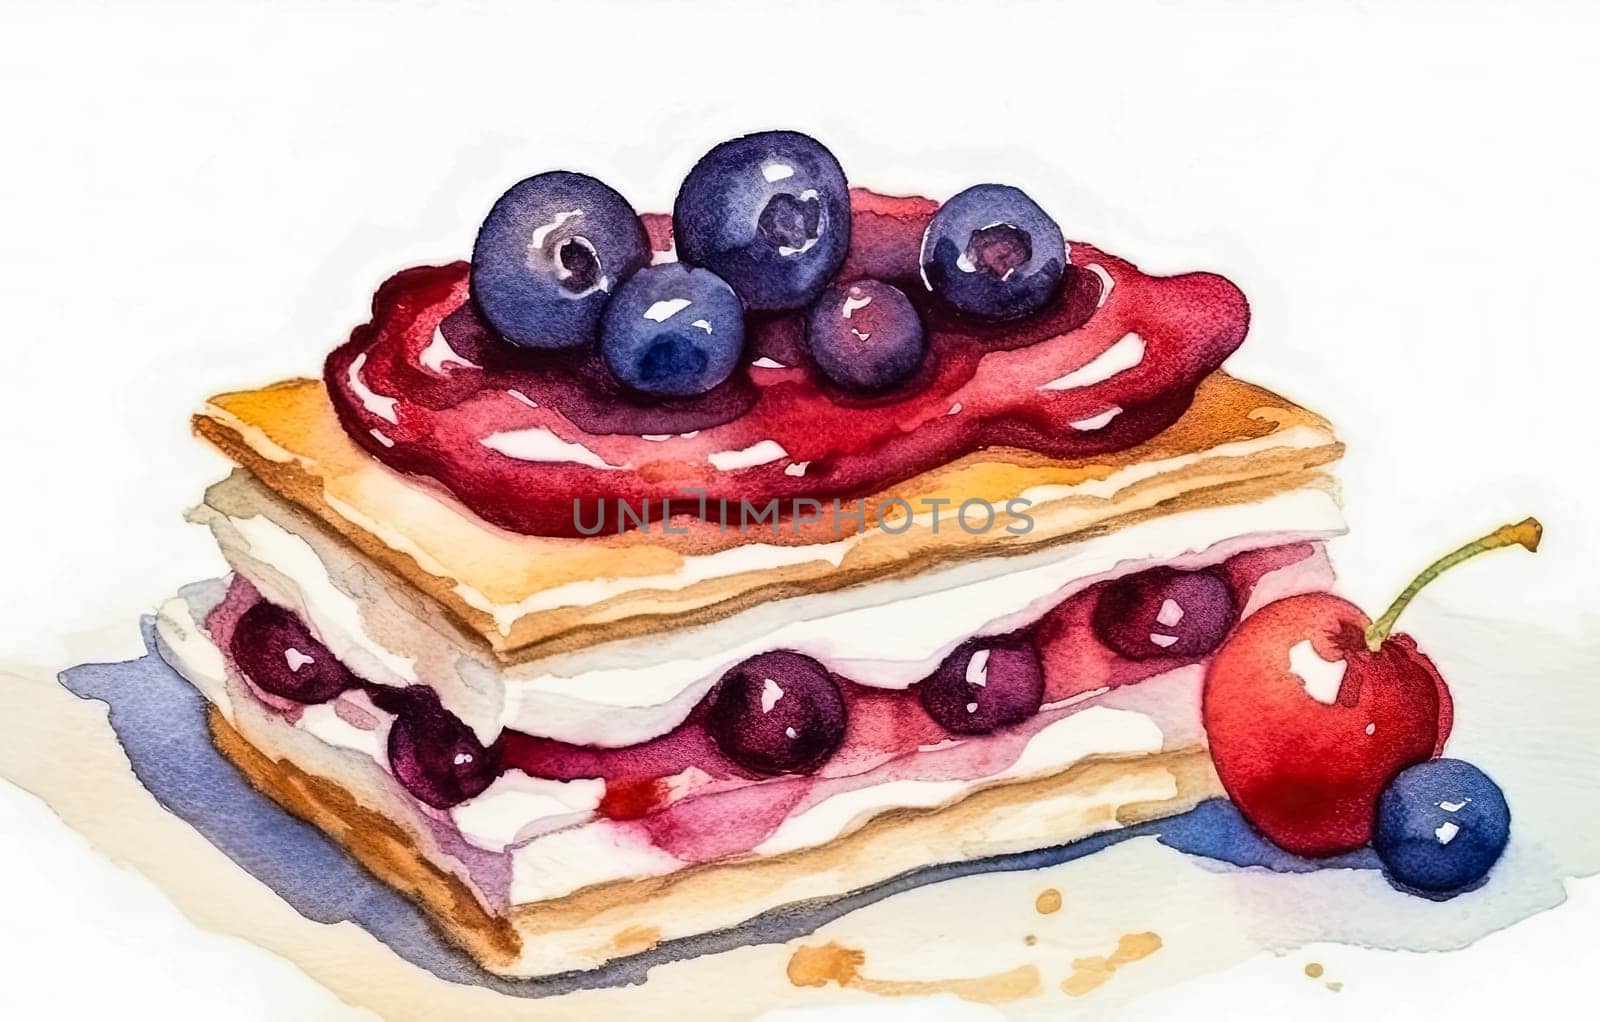 A blueberry cheesecake with a cherry on top. The blueberries are spread across the top of the cake, and the cherry is sitting on the right side. Concept of indulgence and sweetness